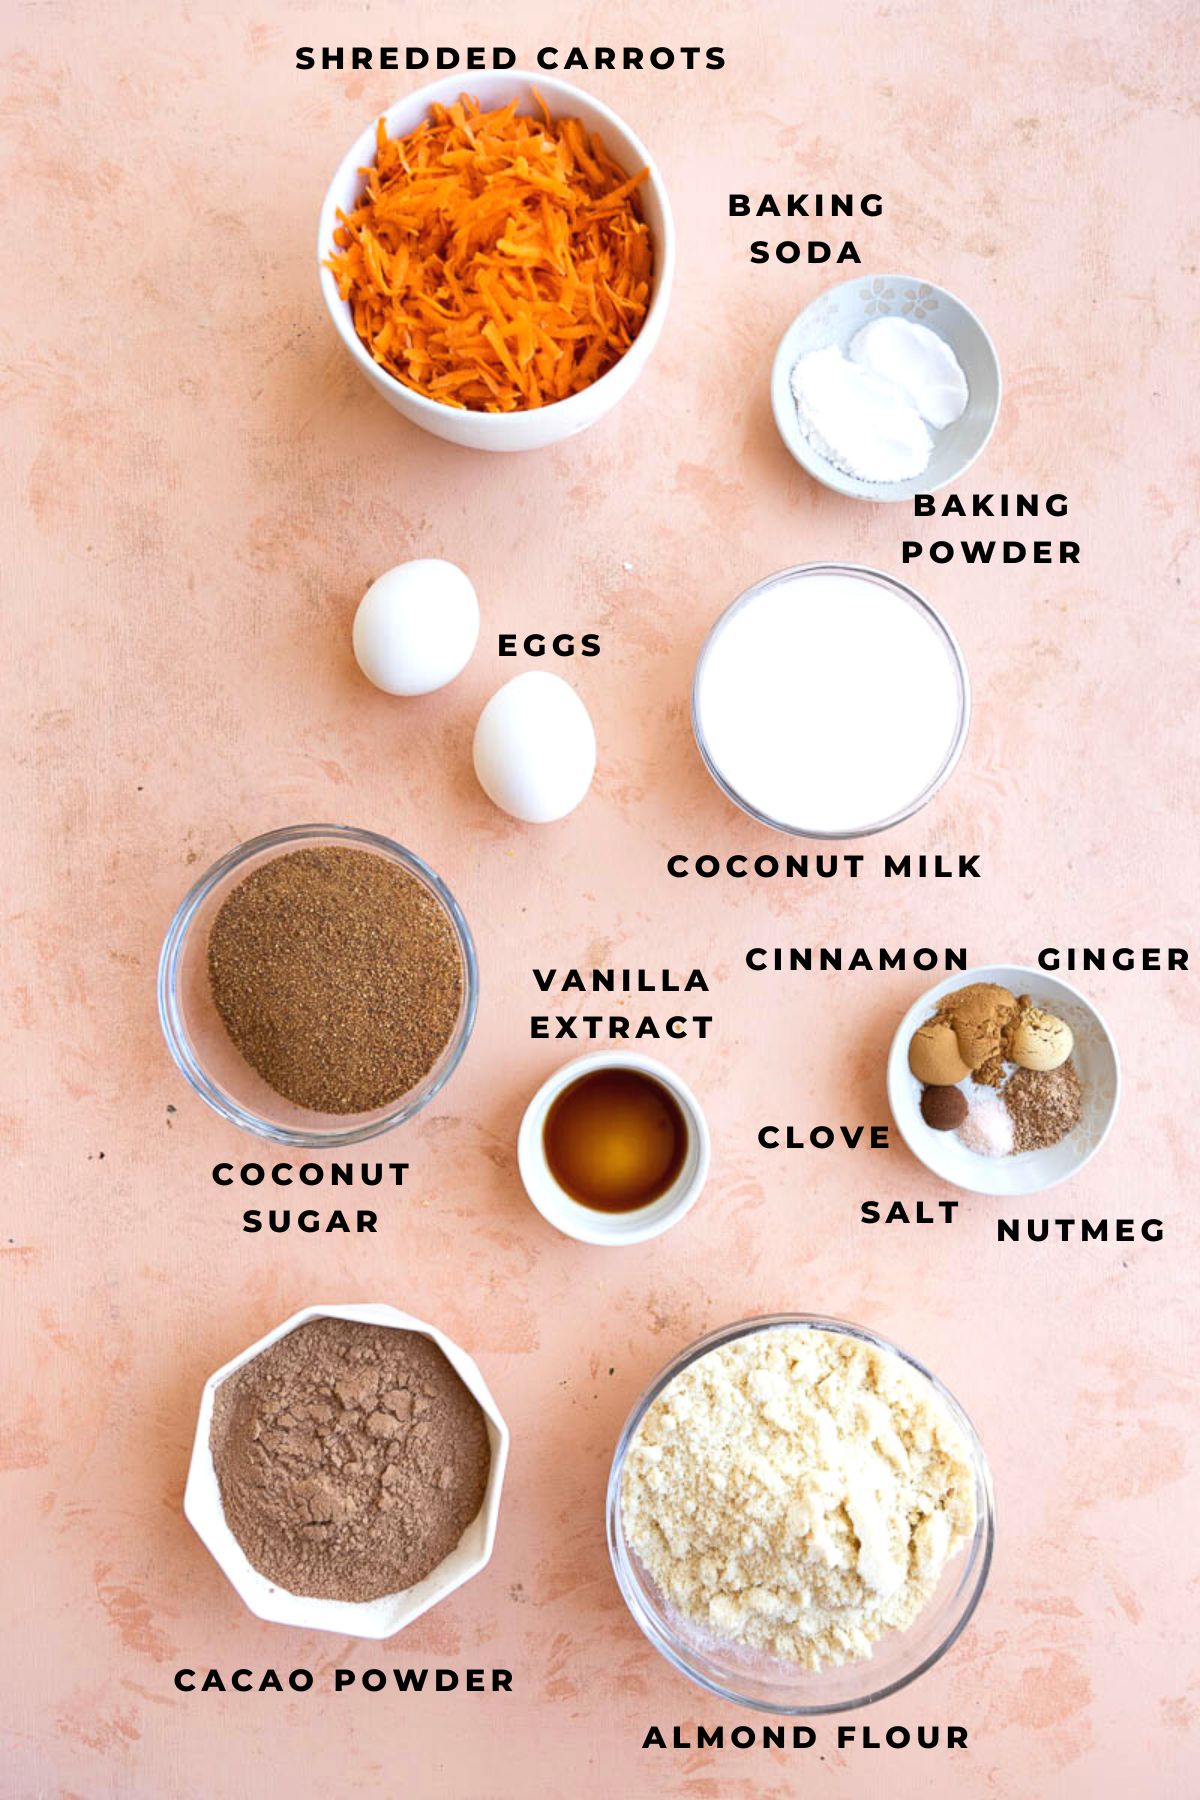 Ingredients measured out for chocolate carrot cake.